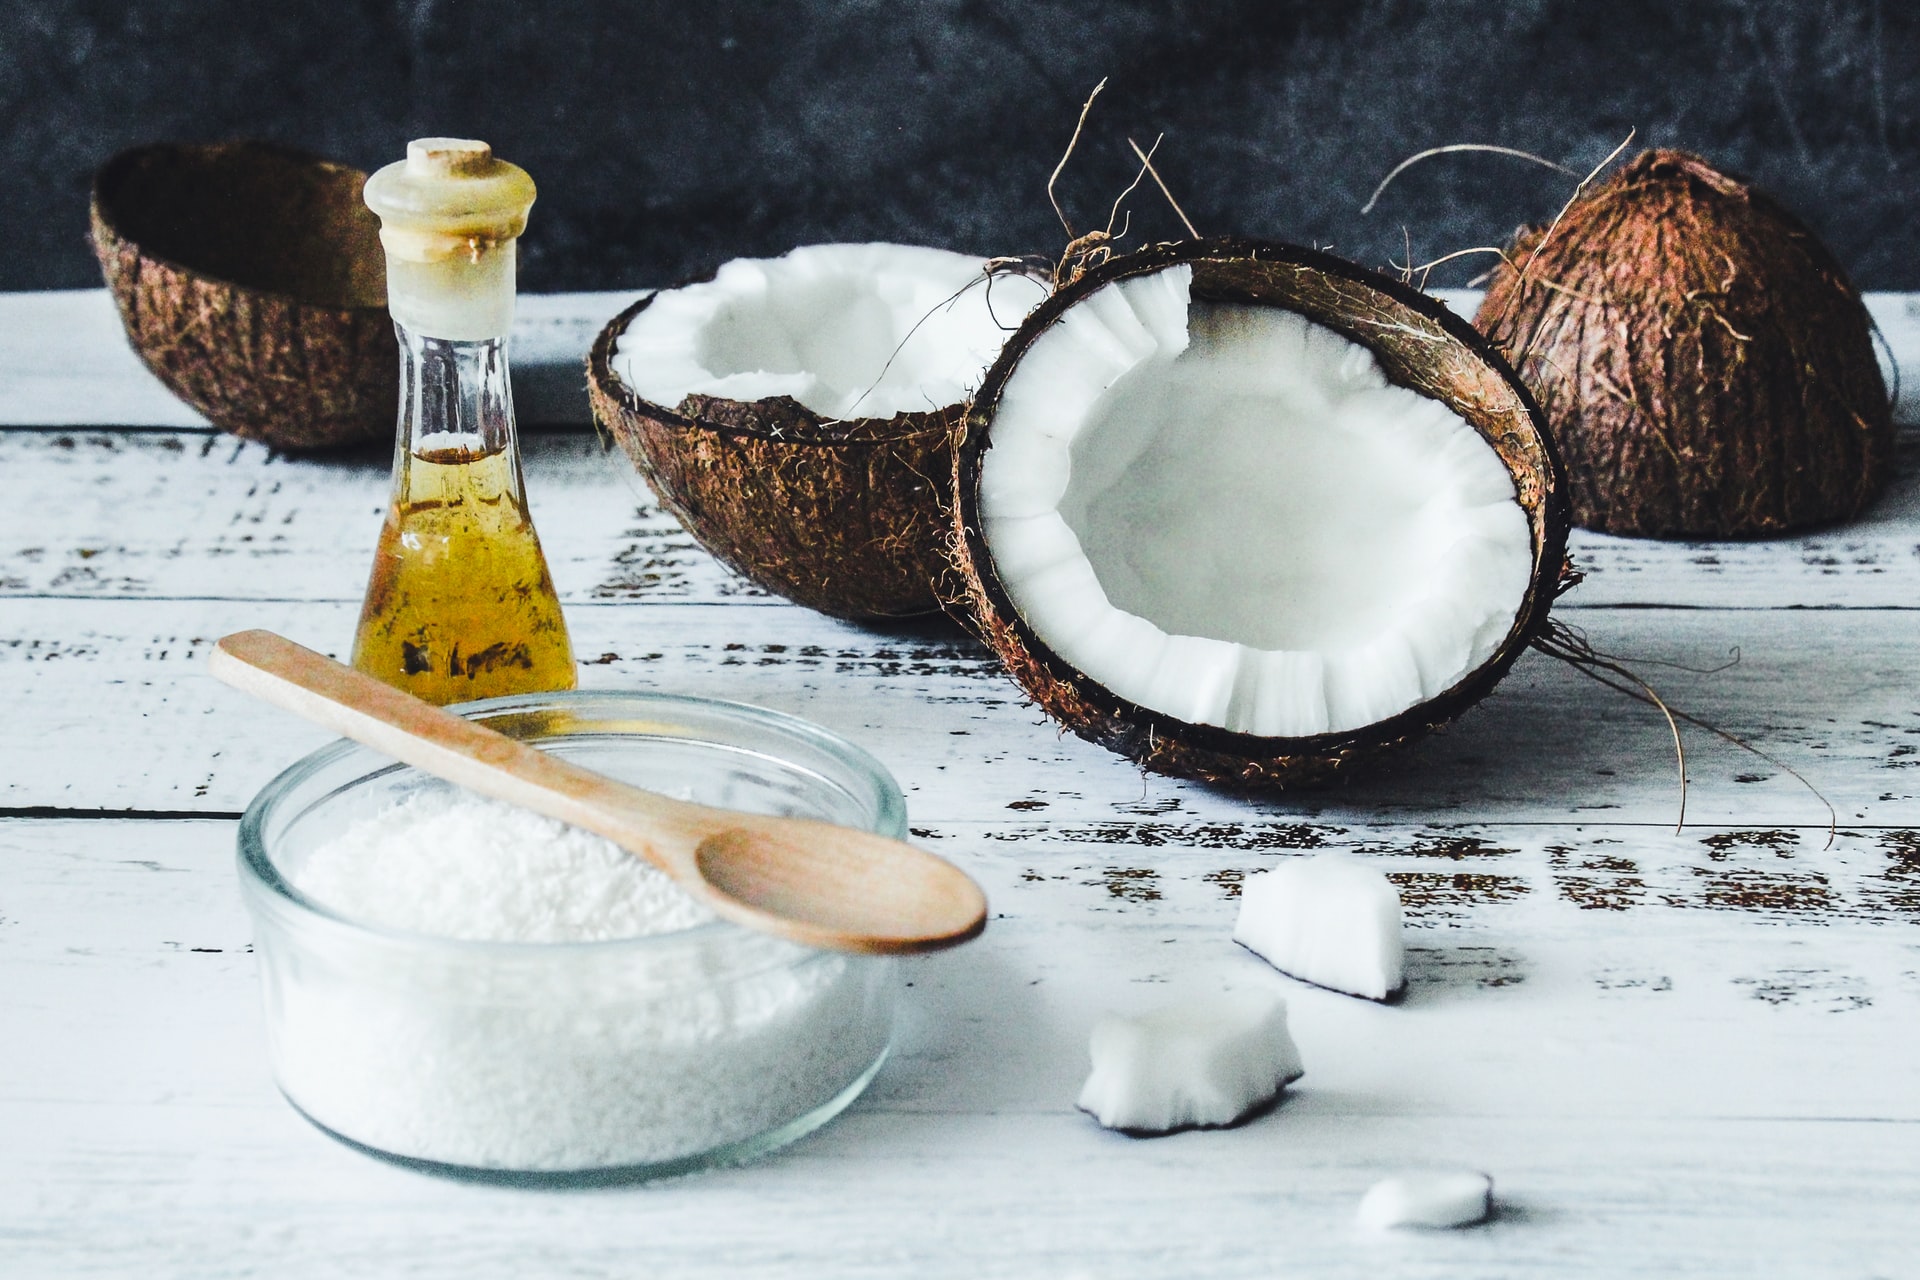 Coconut oil – how does it affect our beauty and how can you make homemade cosmetics with it?